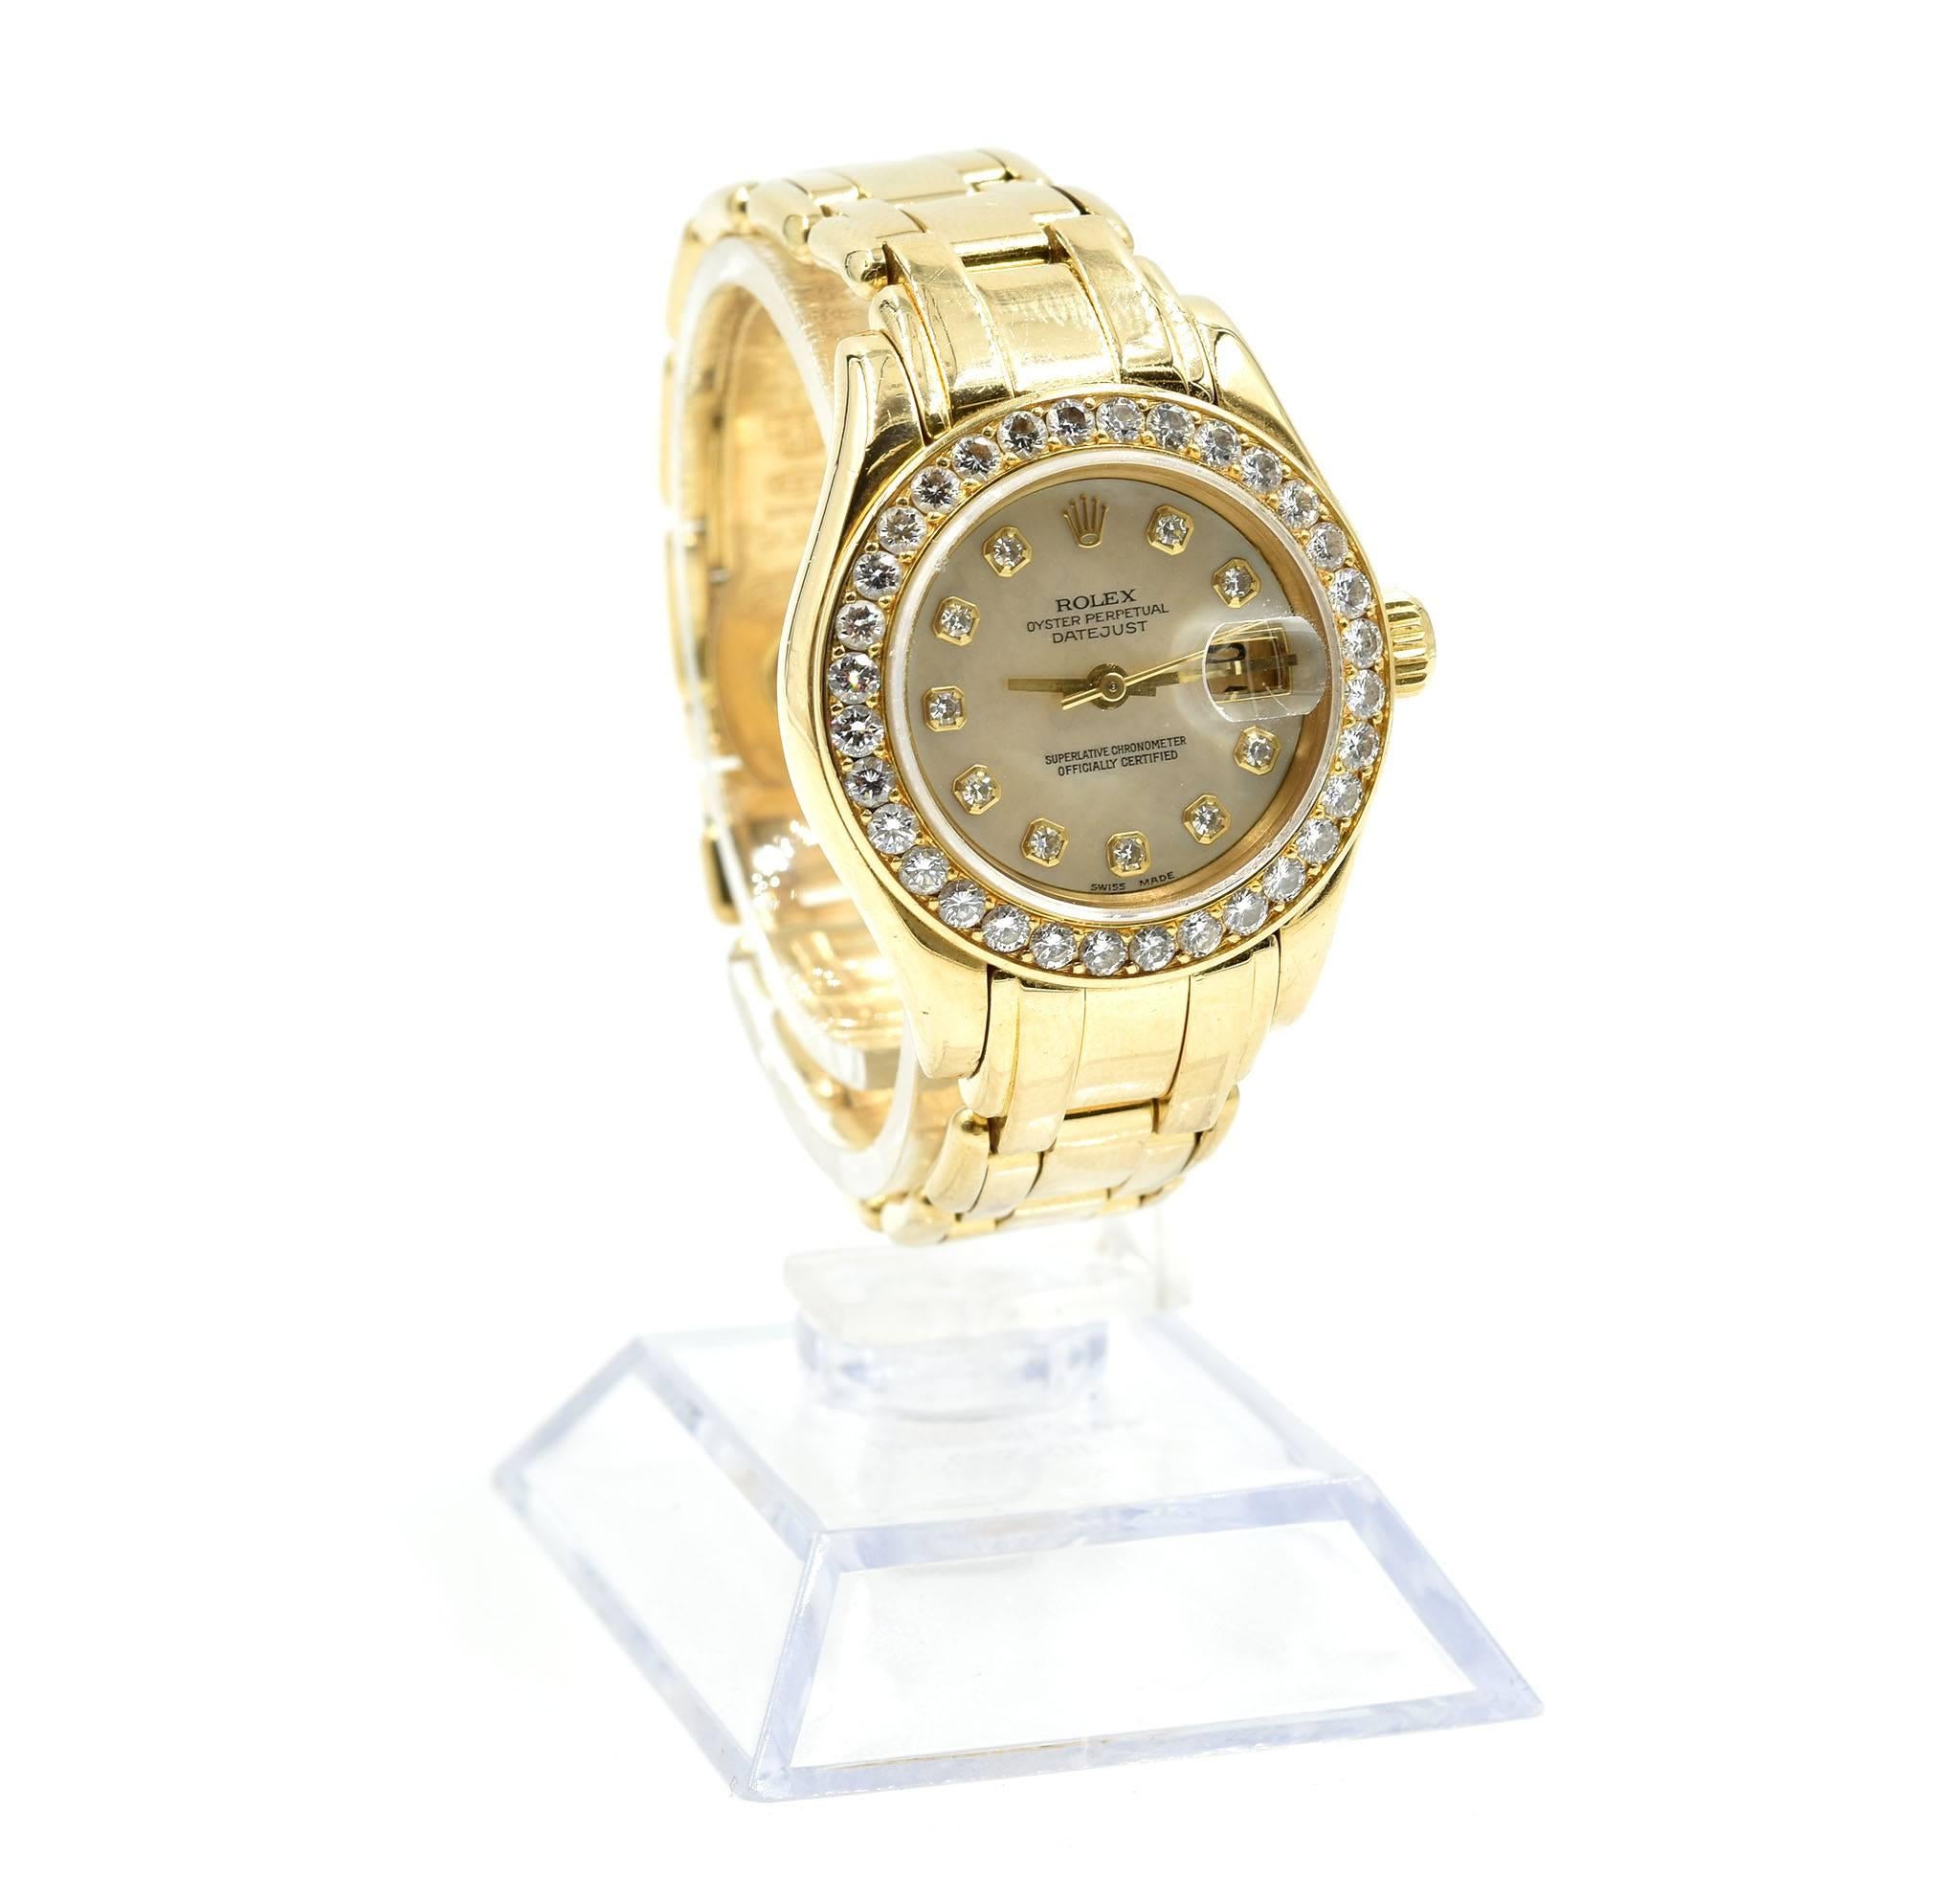 Movement: automatic 2235 movement
Function: hours, minutes, seconds, date
Case: round 29mm 18k yellow gold case with factory thirty-two diamond bezel, scratch resistant sapphire crystal, waterproof screw-down crown to 100 meters
Dial: factory mother